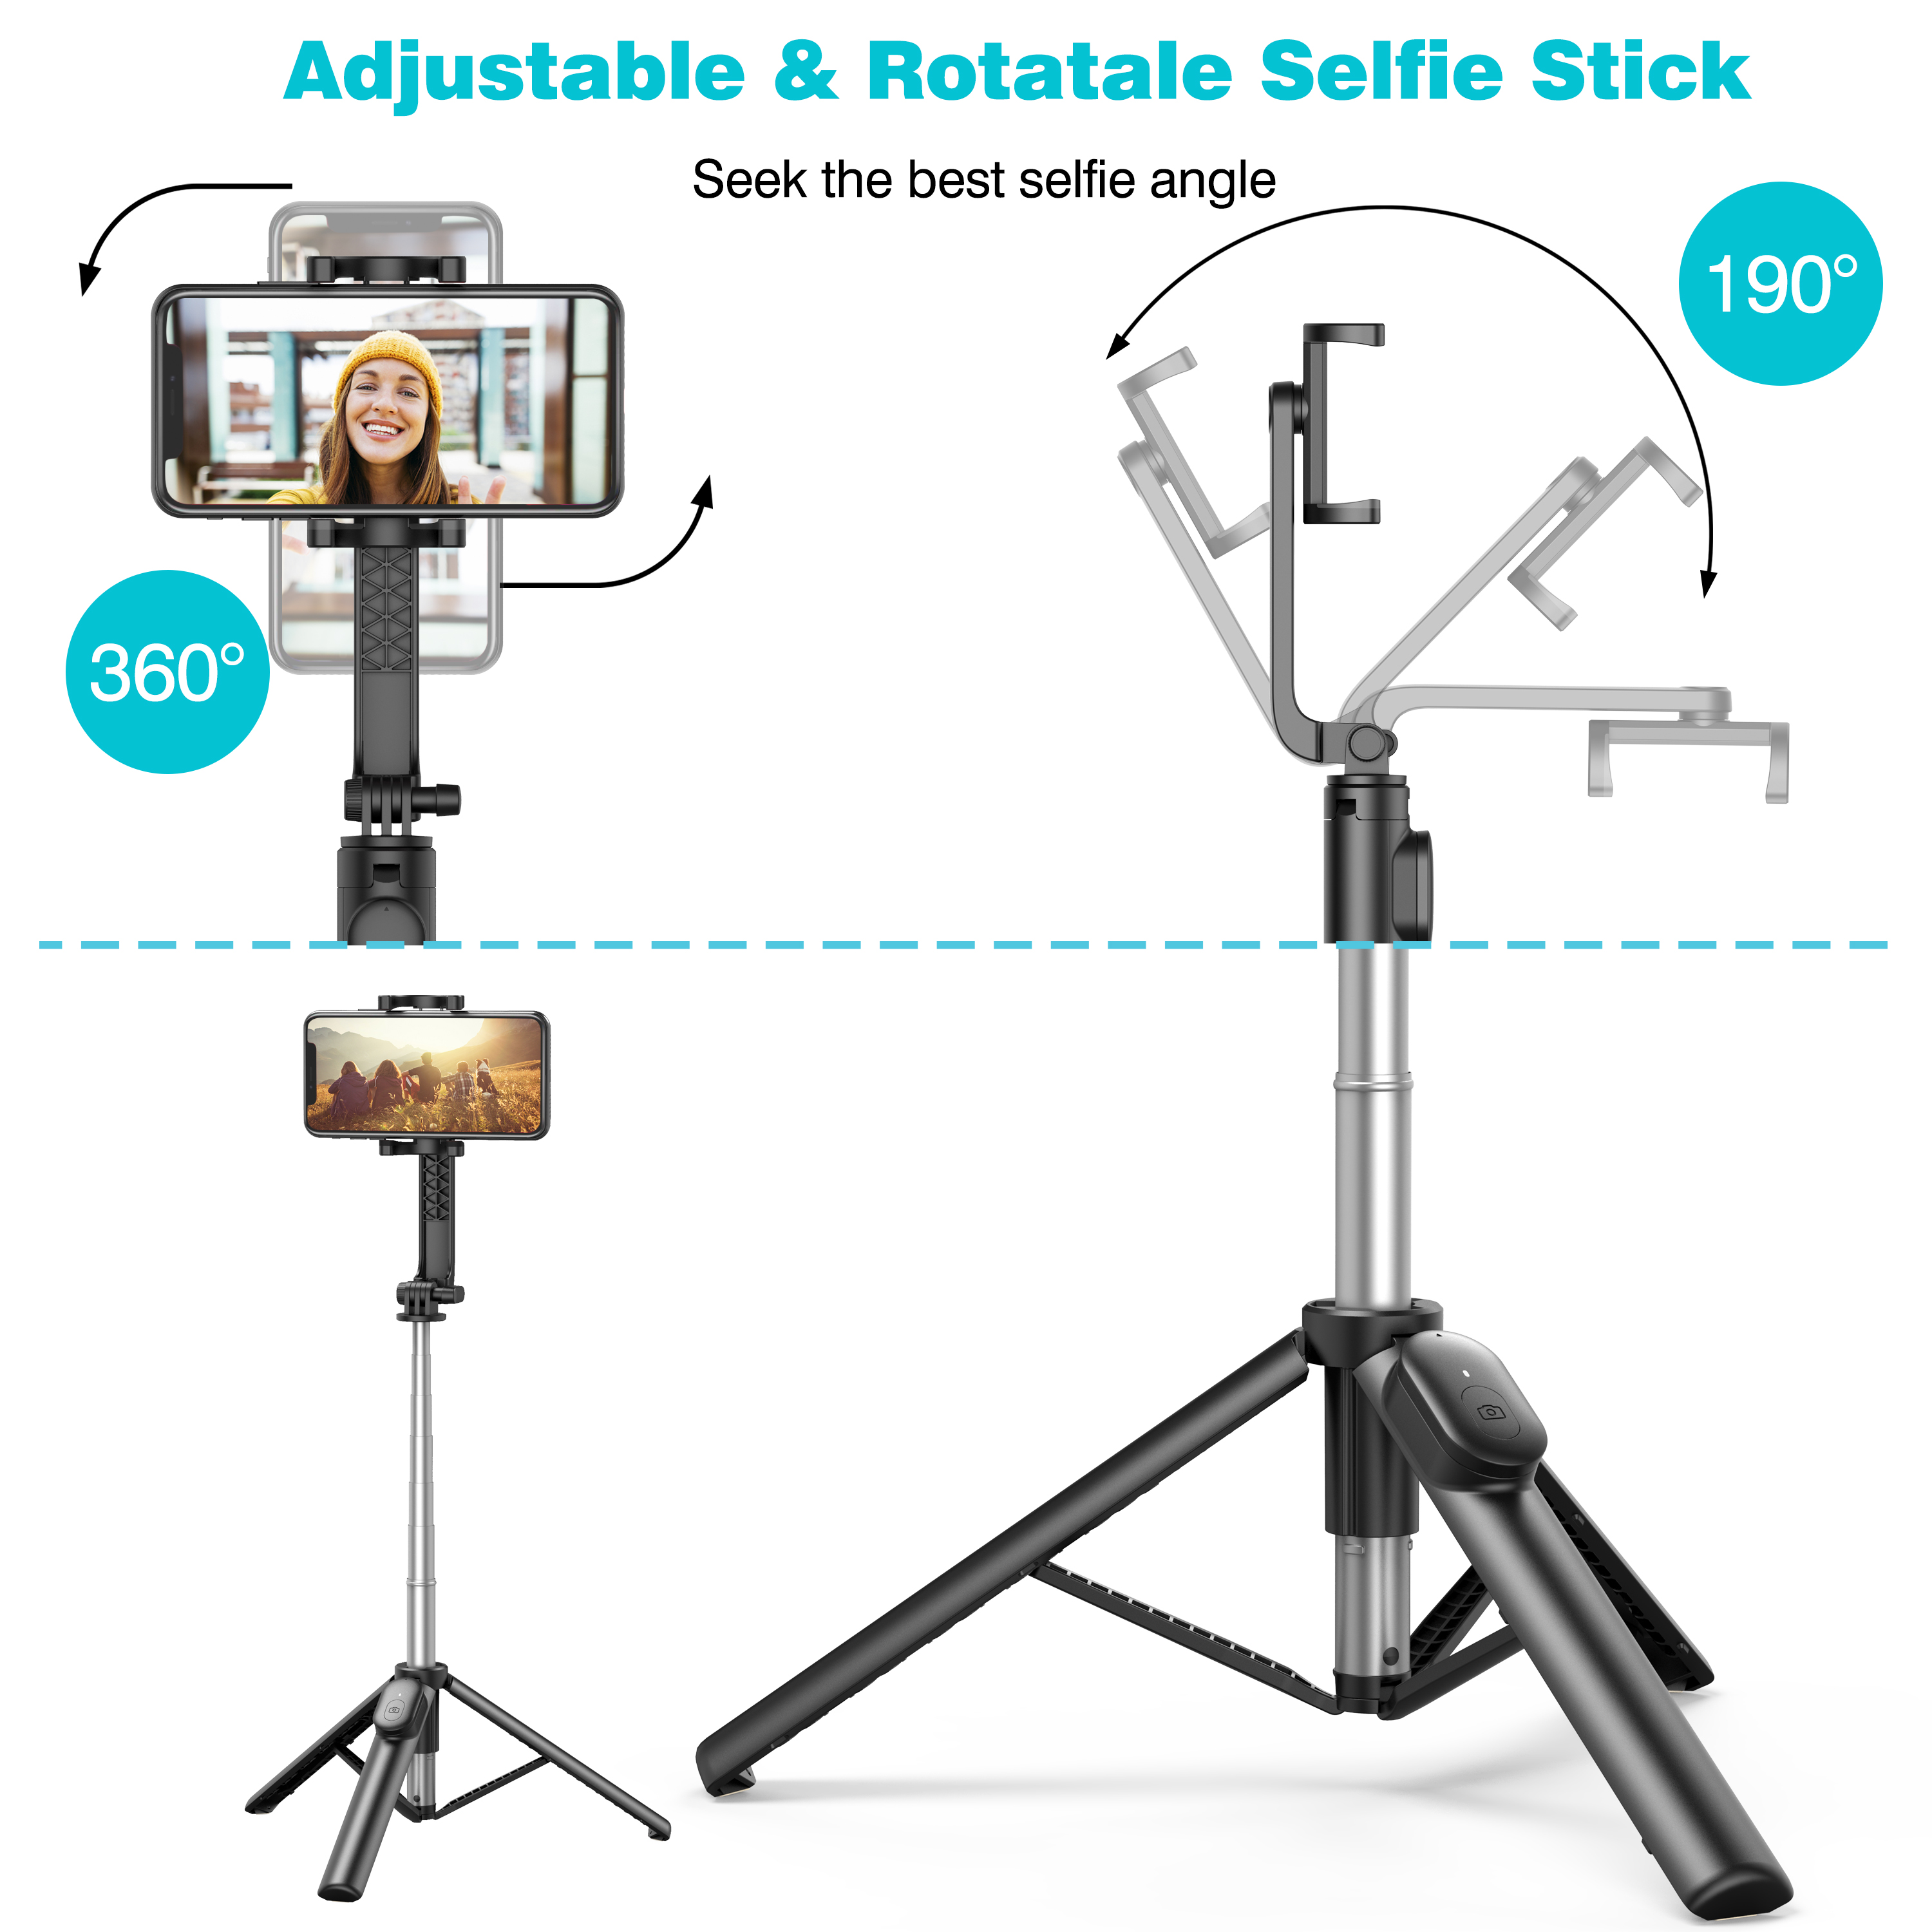  Selfie Stick, Extendable Selfie Stick Tripod with Detachable Wireless Remote and Tripod Stand Selfie Stick Compatible with All Cell Phone, Compact Size & Lightweigh  